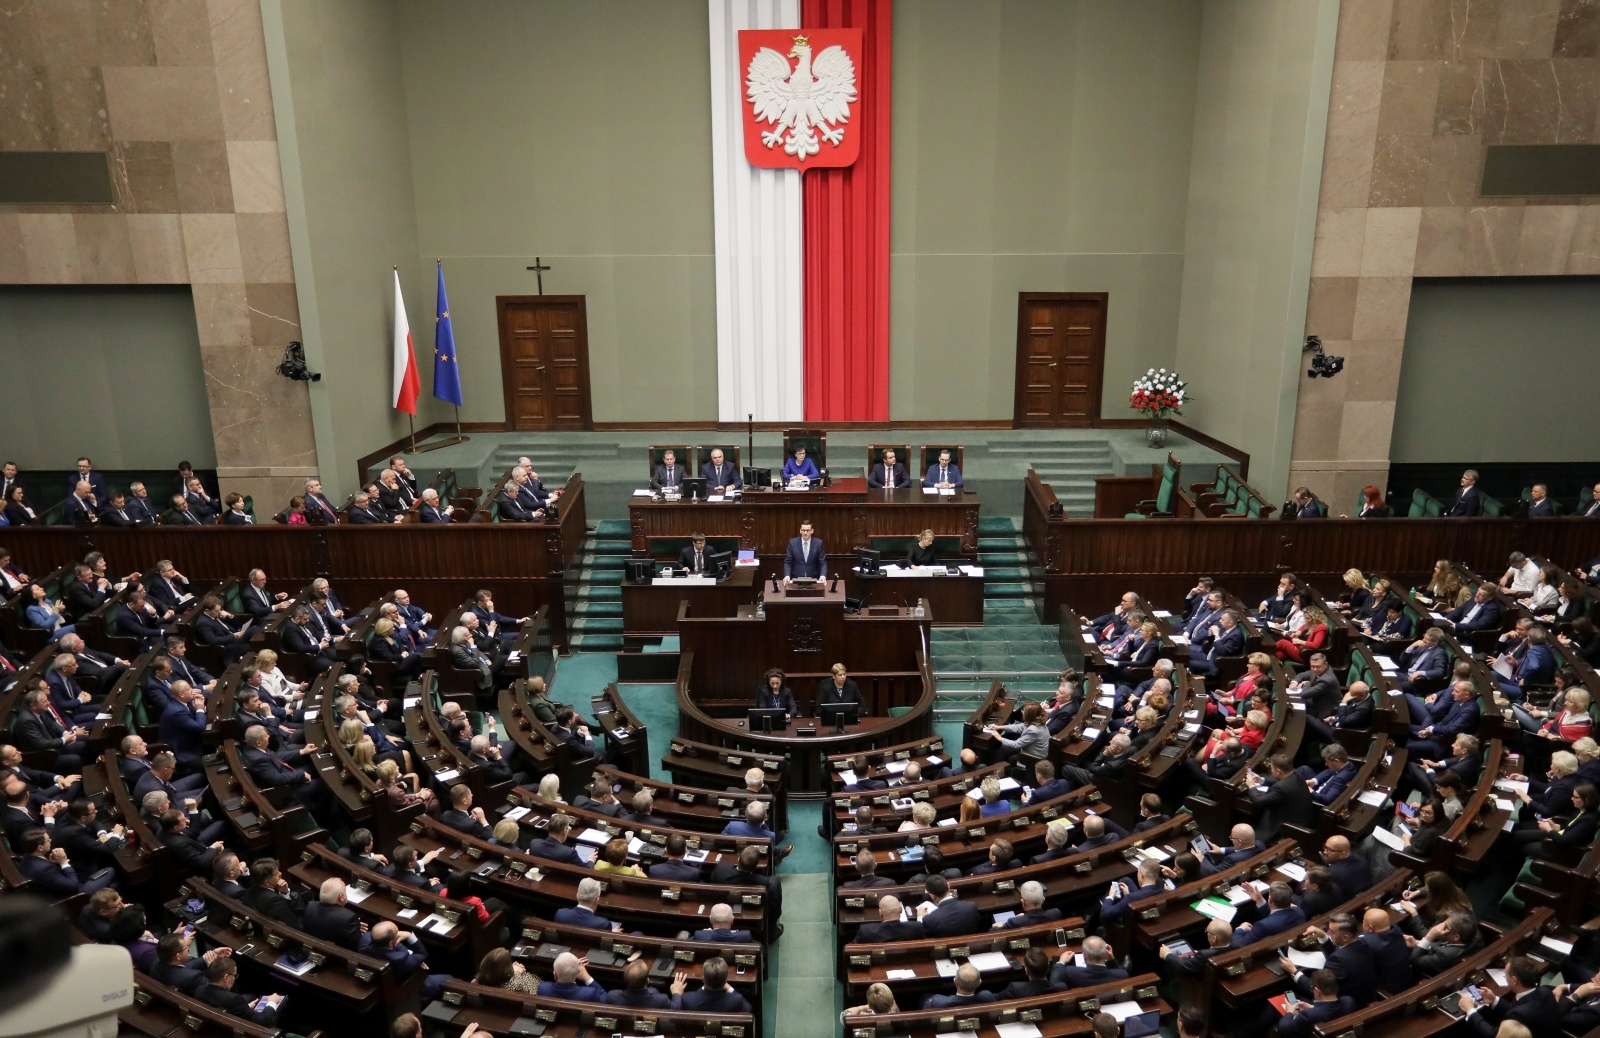 Poland's Prime Minister Morawiecki speaks in parliament in Warsaw Poland's Prime Minister Mateusz Morawiecki delivers a speech during a session of parliament in Warsaw, Poland November 19, 2019. Slawomir Kaminski/Agencja Gazeta via REUTERS  ATTENTION EDITORS - THIS IMAGE WAS PROVIDED BY A THIRD PARTY. POLAND OUT. NO COMMERCIAL OR EDITORIAL SALES IN POLAND. AGENCJA GAZETA